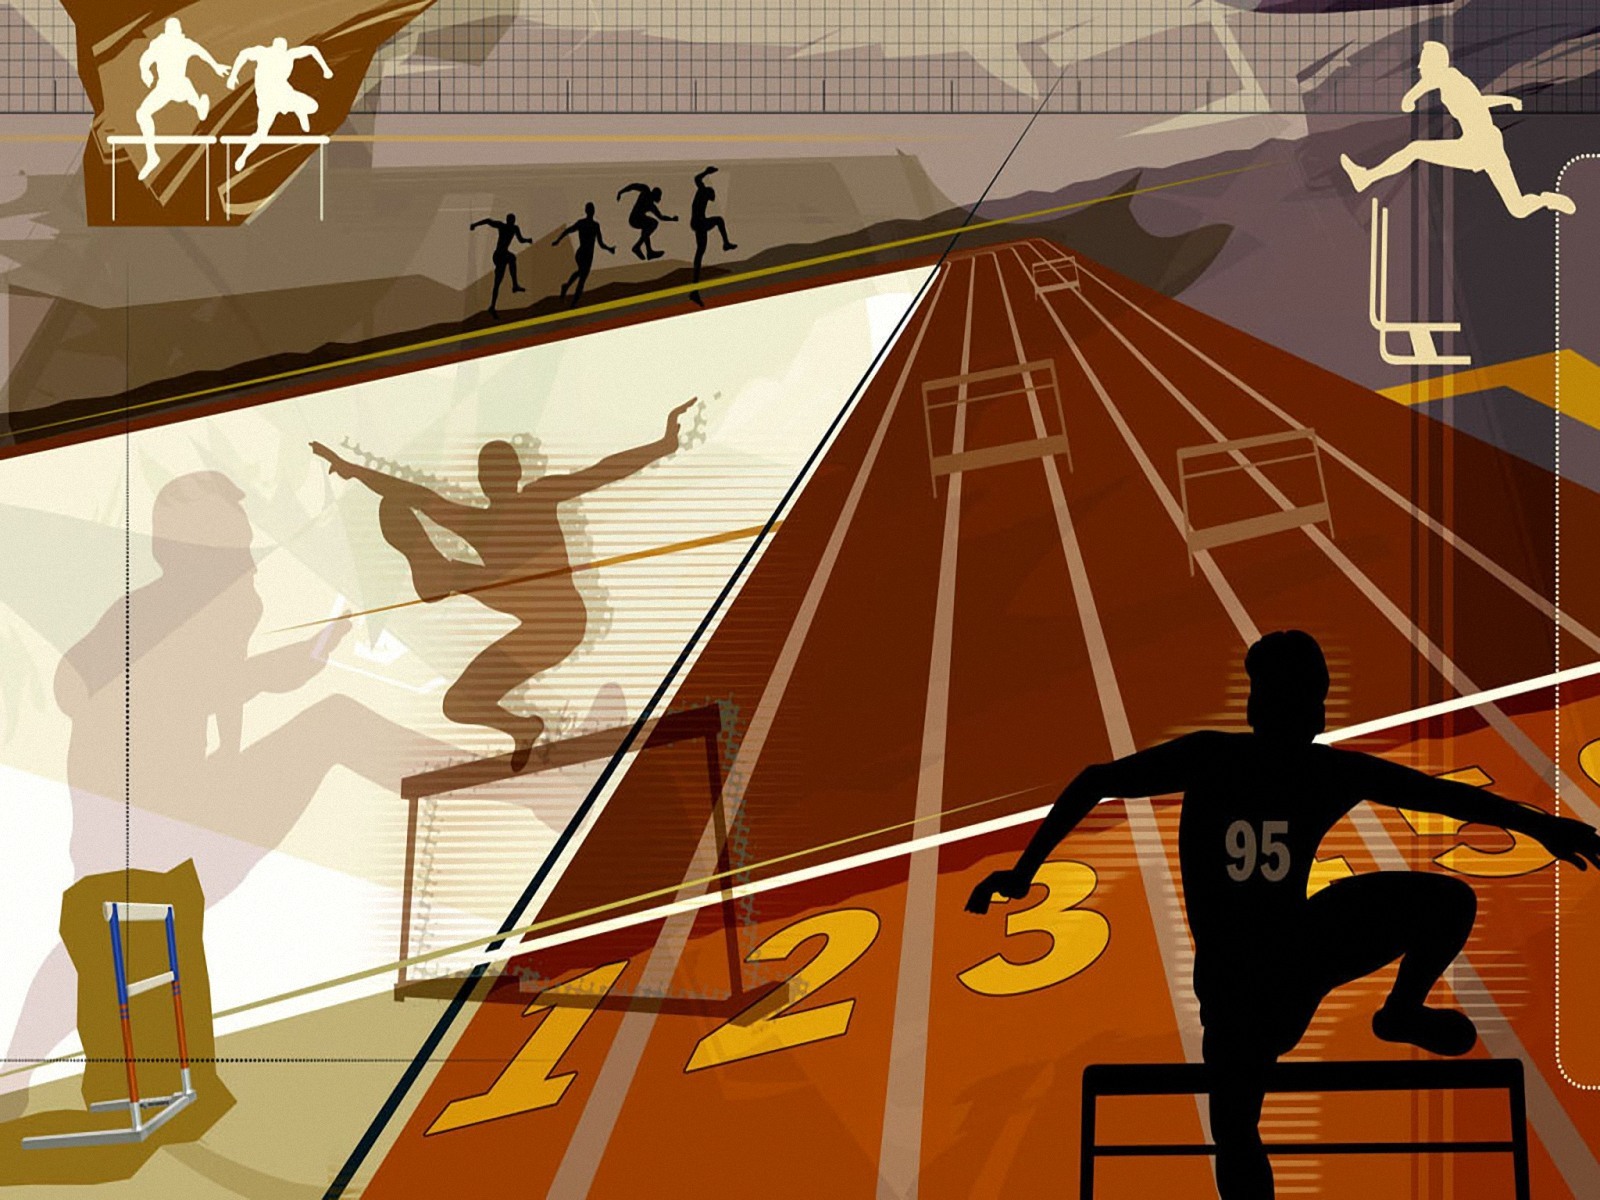 track and field wallpaper